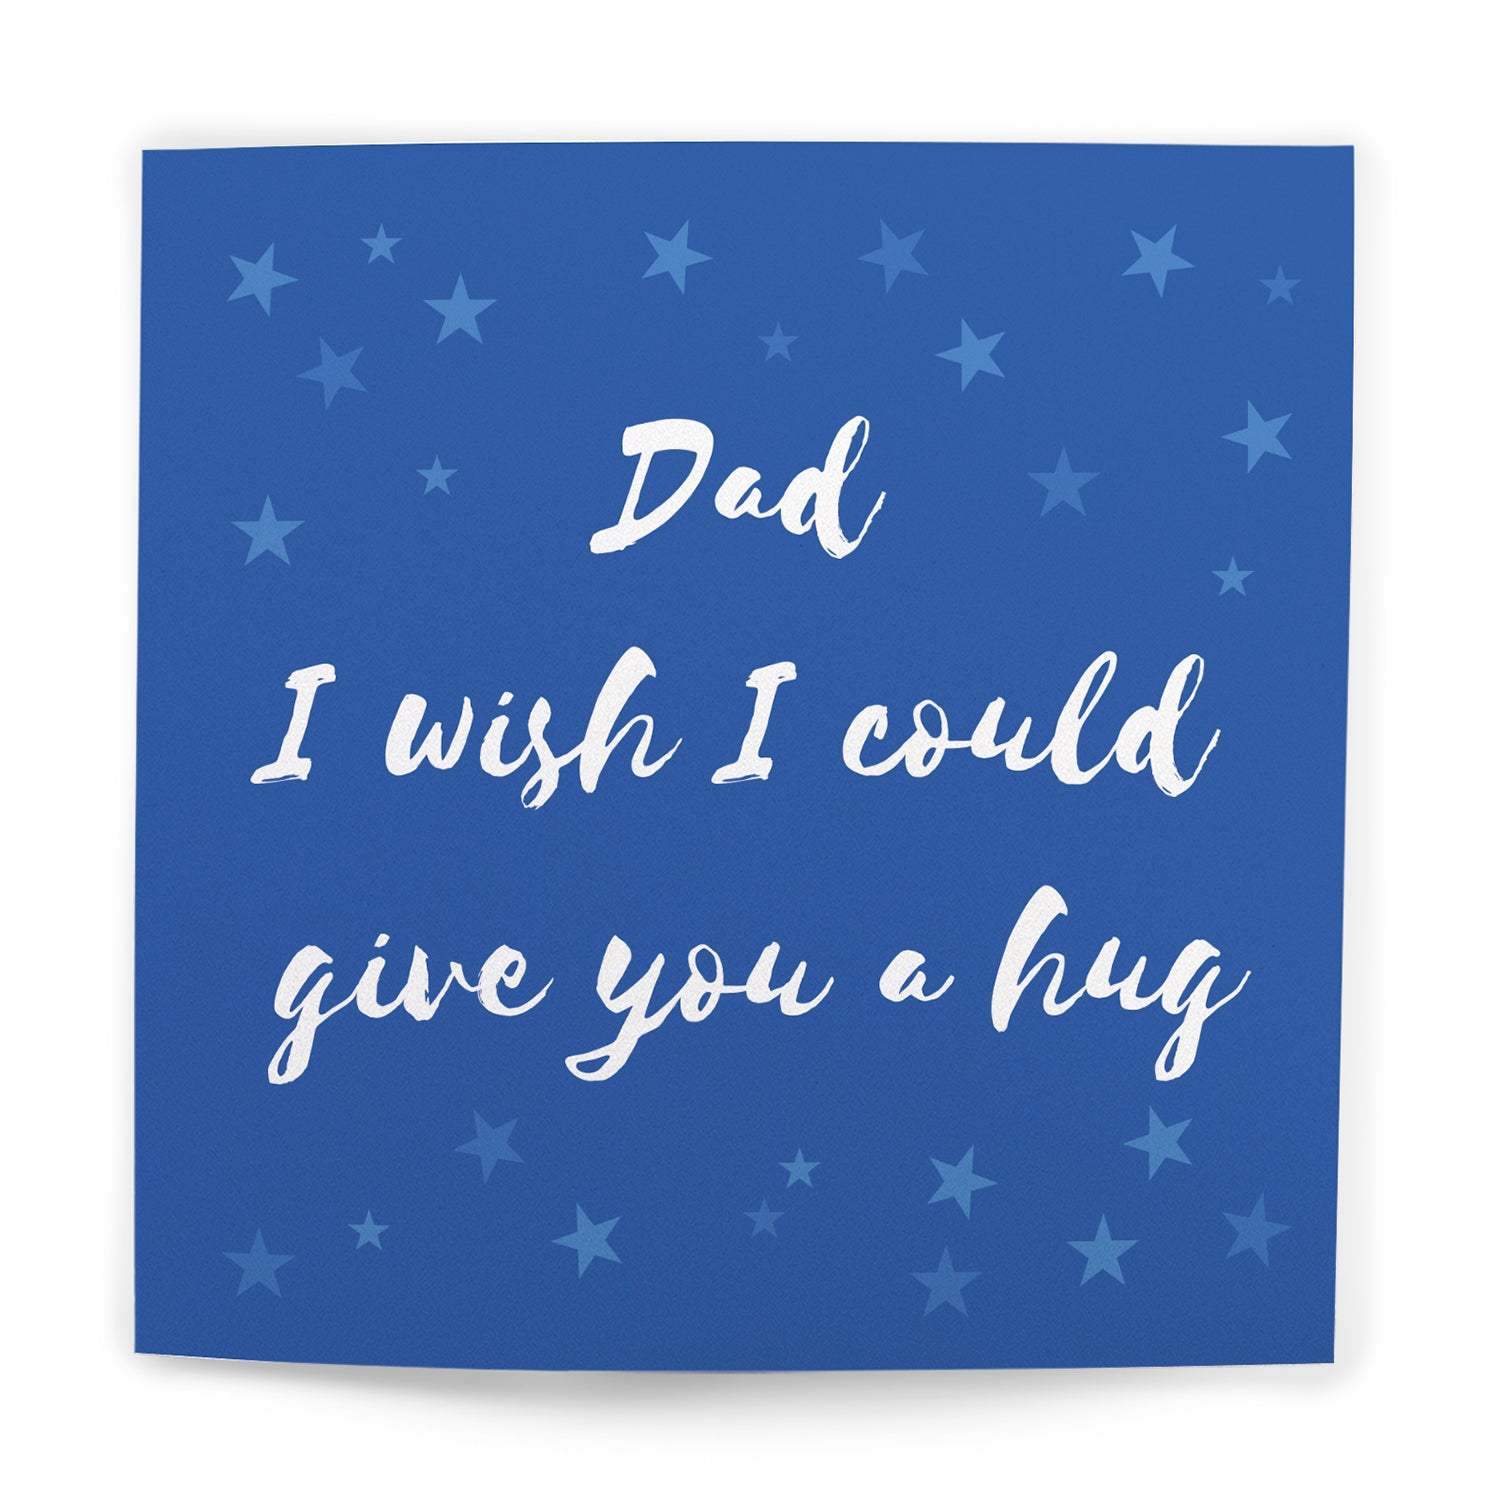 fathers day card - dad Iwish i could give you a hug - Michton Uk